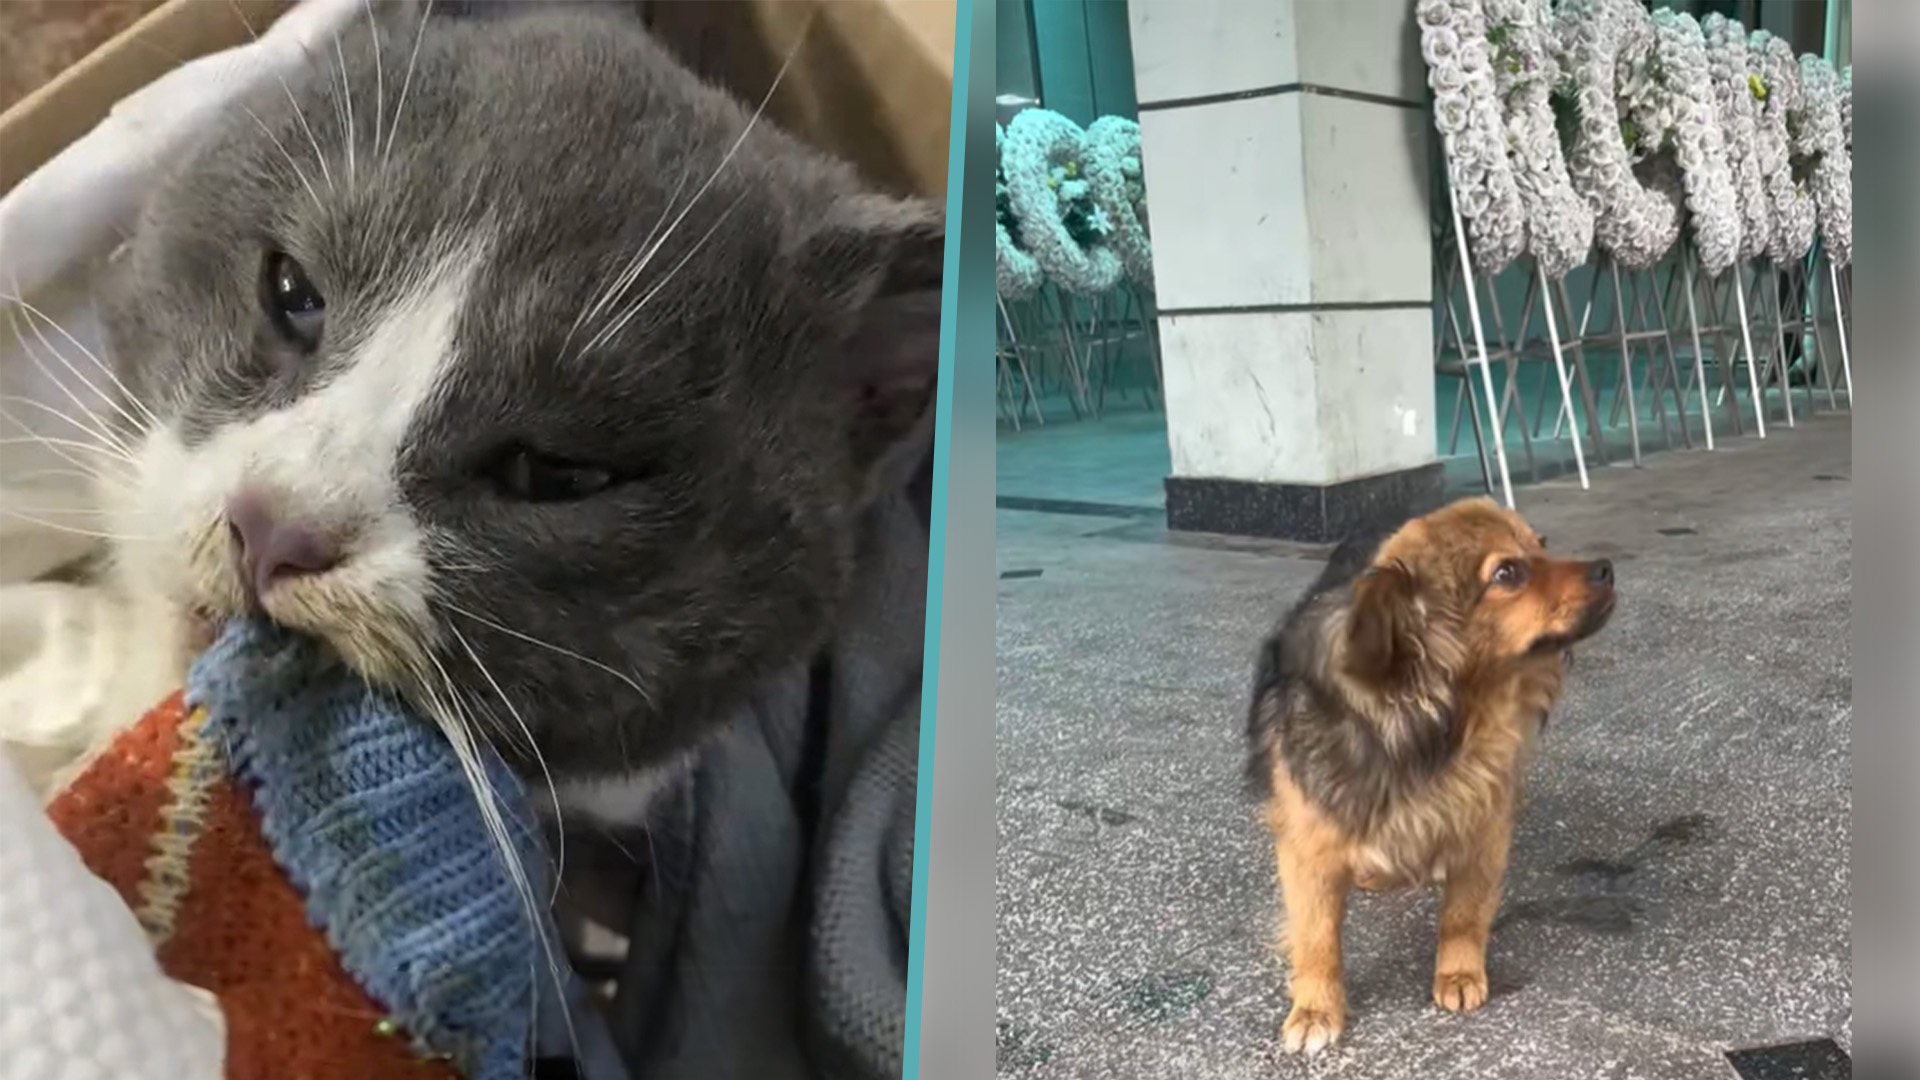 Pet passion: a dying cat hangs onto owner’s sweater with its last breath and a disabled dog refuses to leave its master’s funeral, moving many people in China to tears. Photo: SCMP composite/Douyin